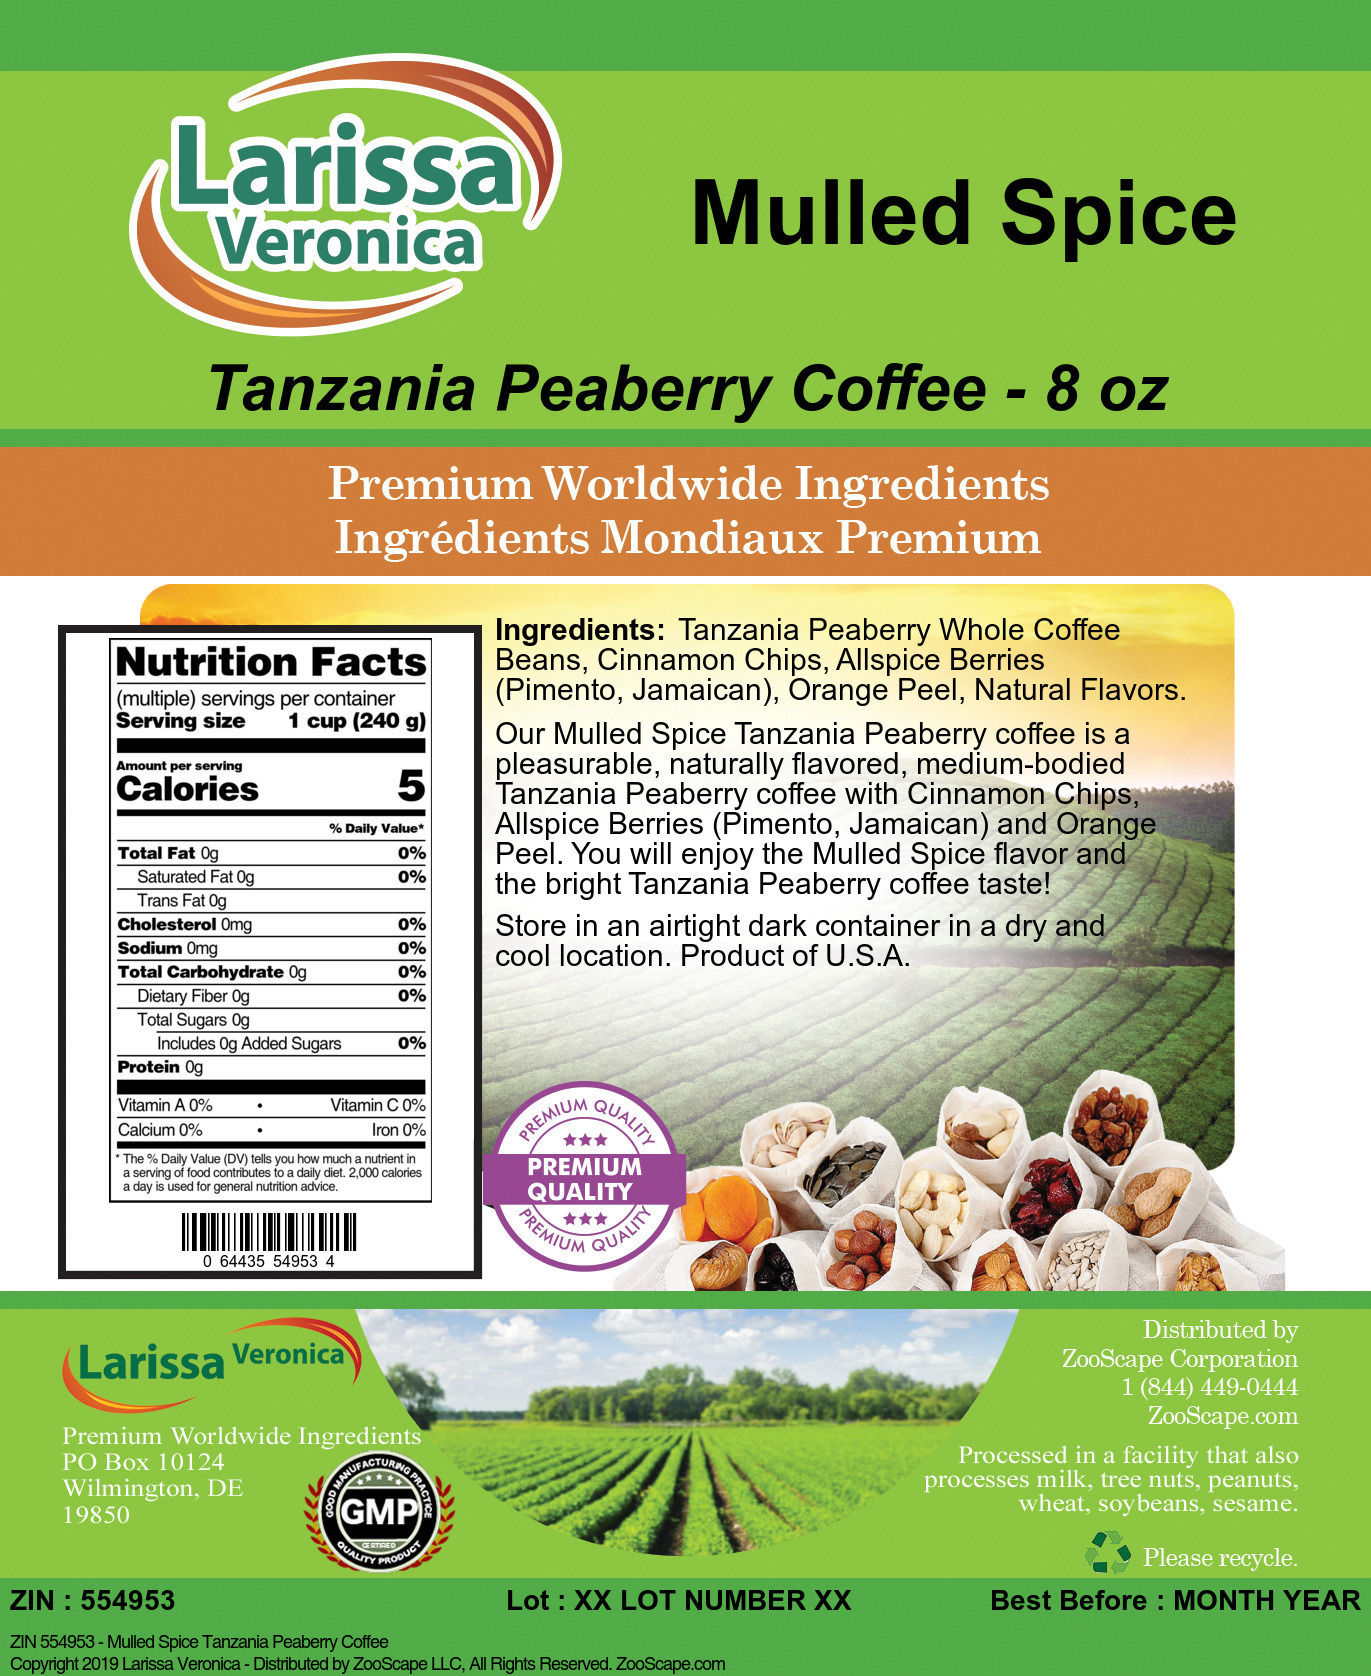 Mulled Spice Tanzania Peaberry Coffee - Label